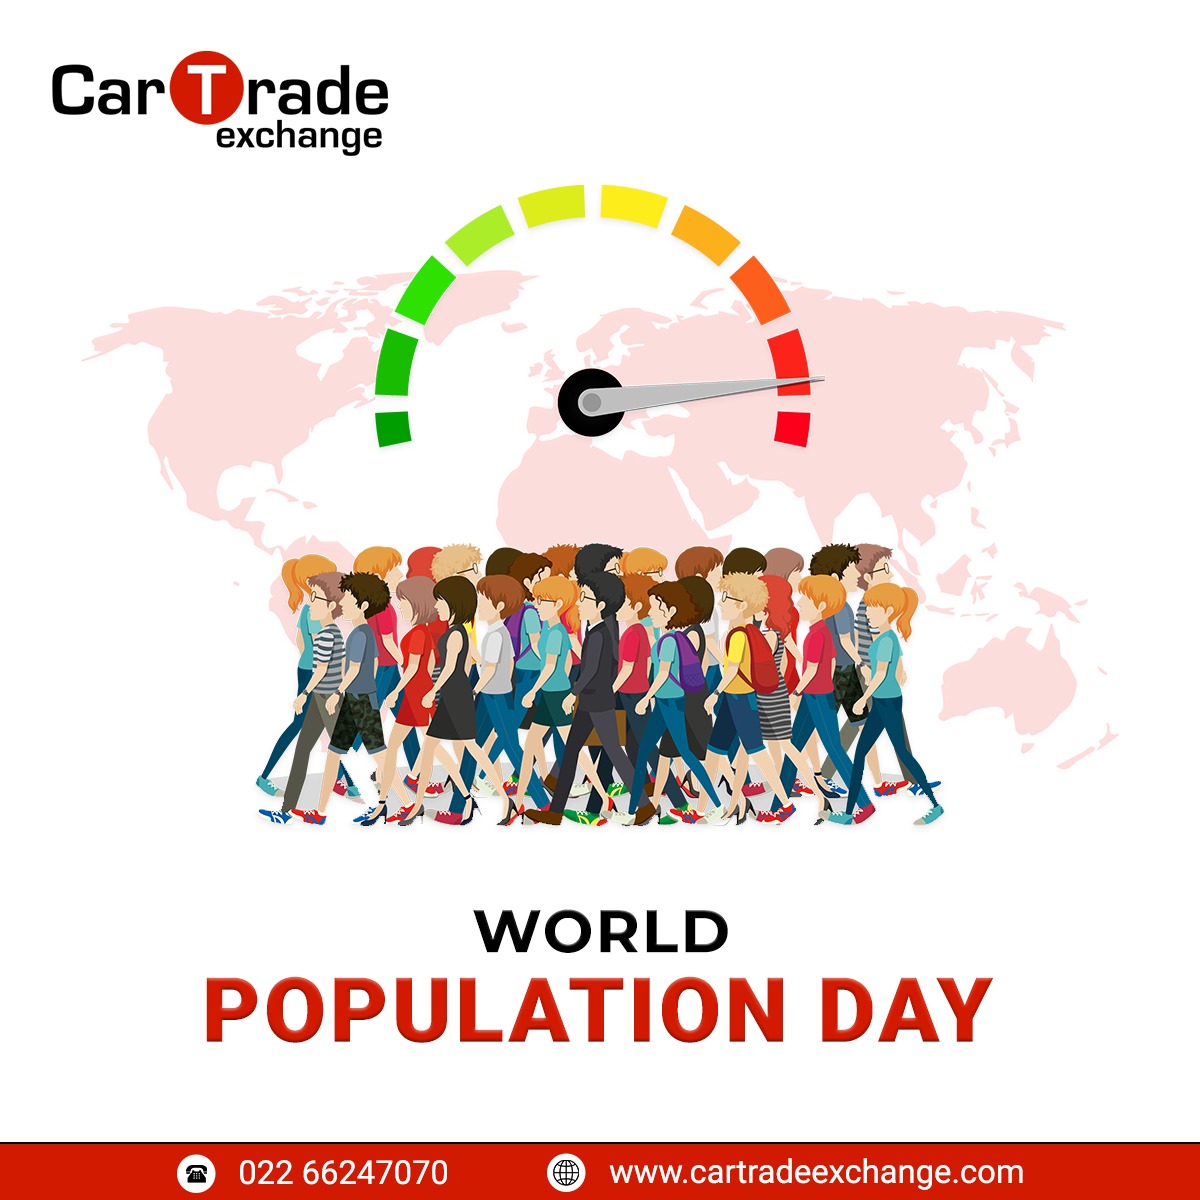 The world is not a gift from our ancestors but a loan from our children
On this World Population Day, we shall aim to save and create a better world for them by not overpopulating it. 

#WorldPopulationDay #UsedVehicles #UsedEquipment #PhysicalAuction #CTE #CarTradeExchange https://t.co/7X9yN6dLw5